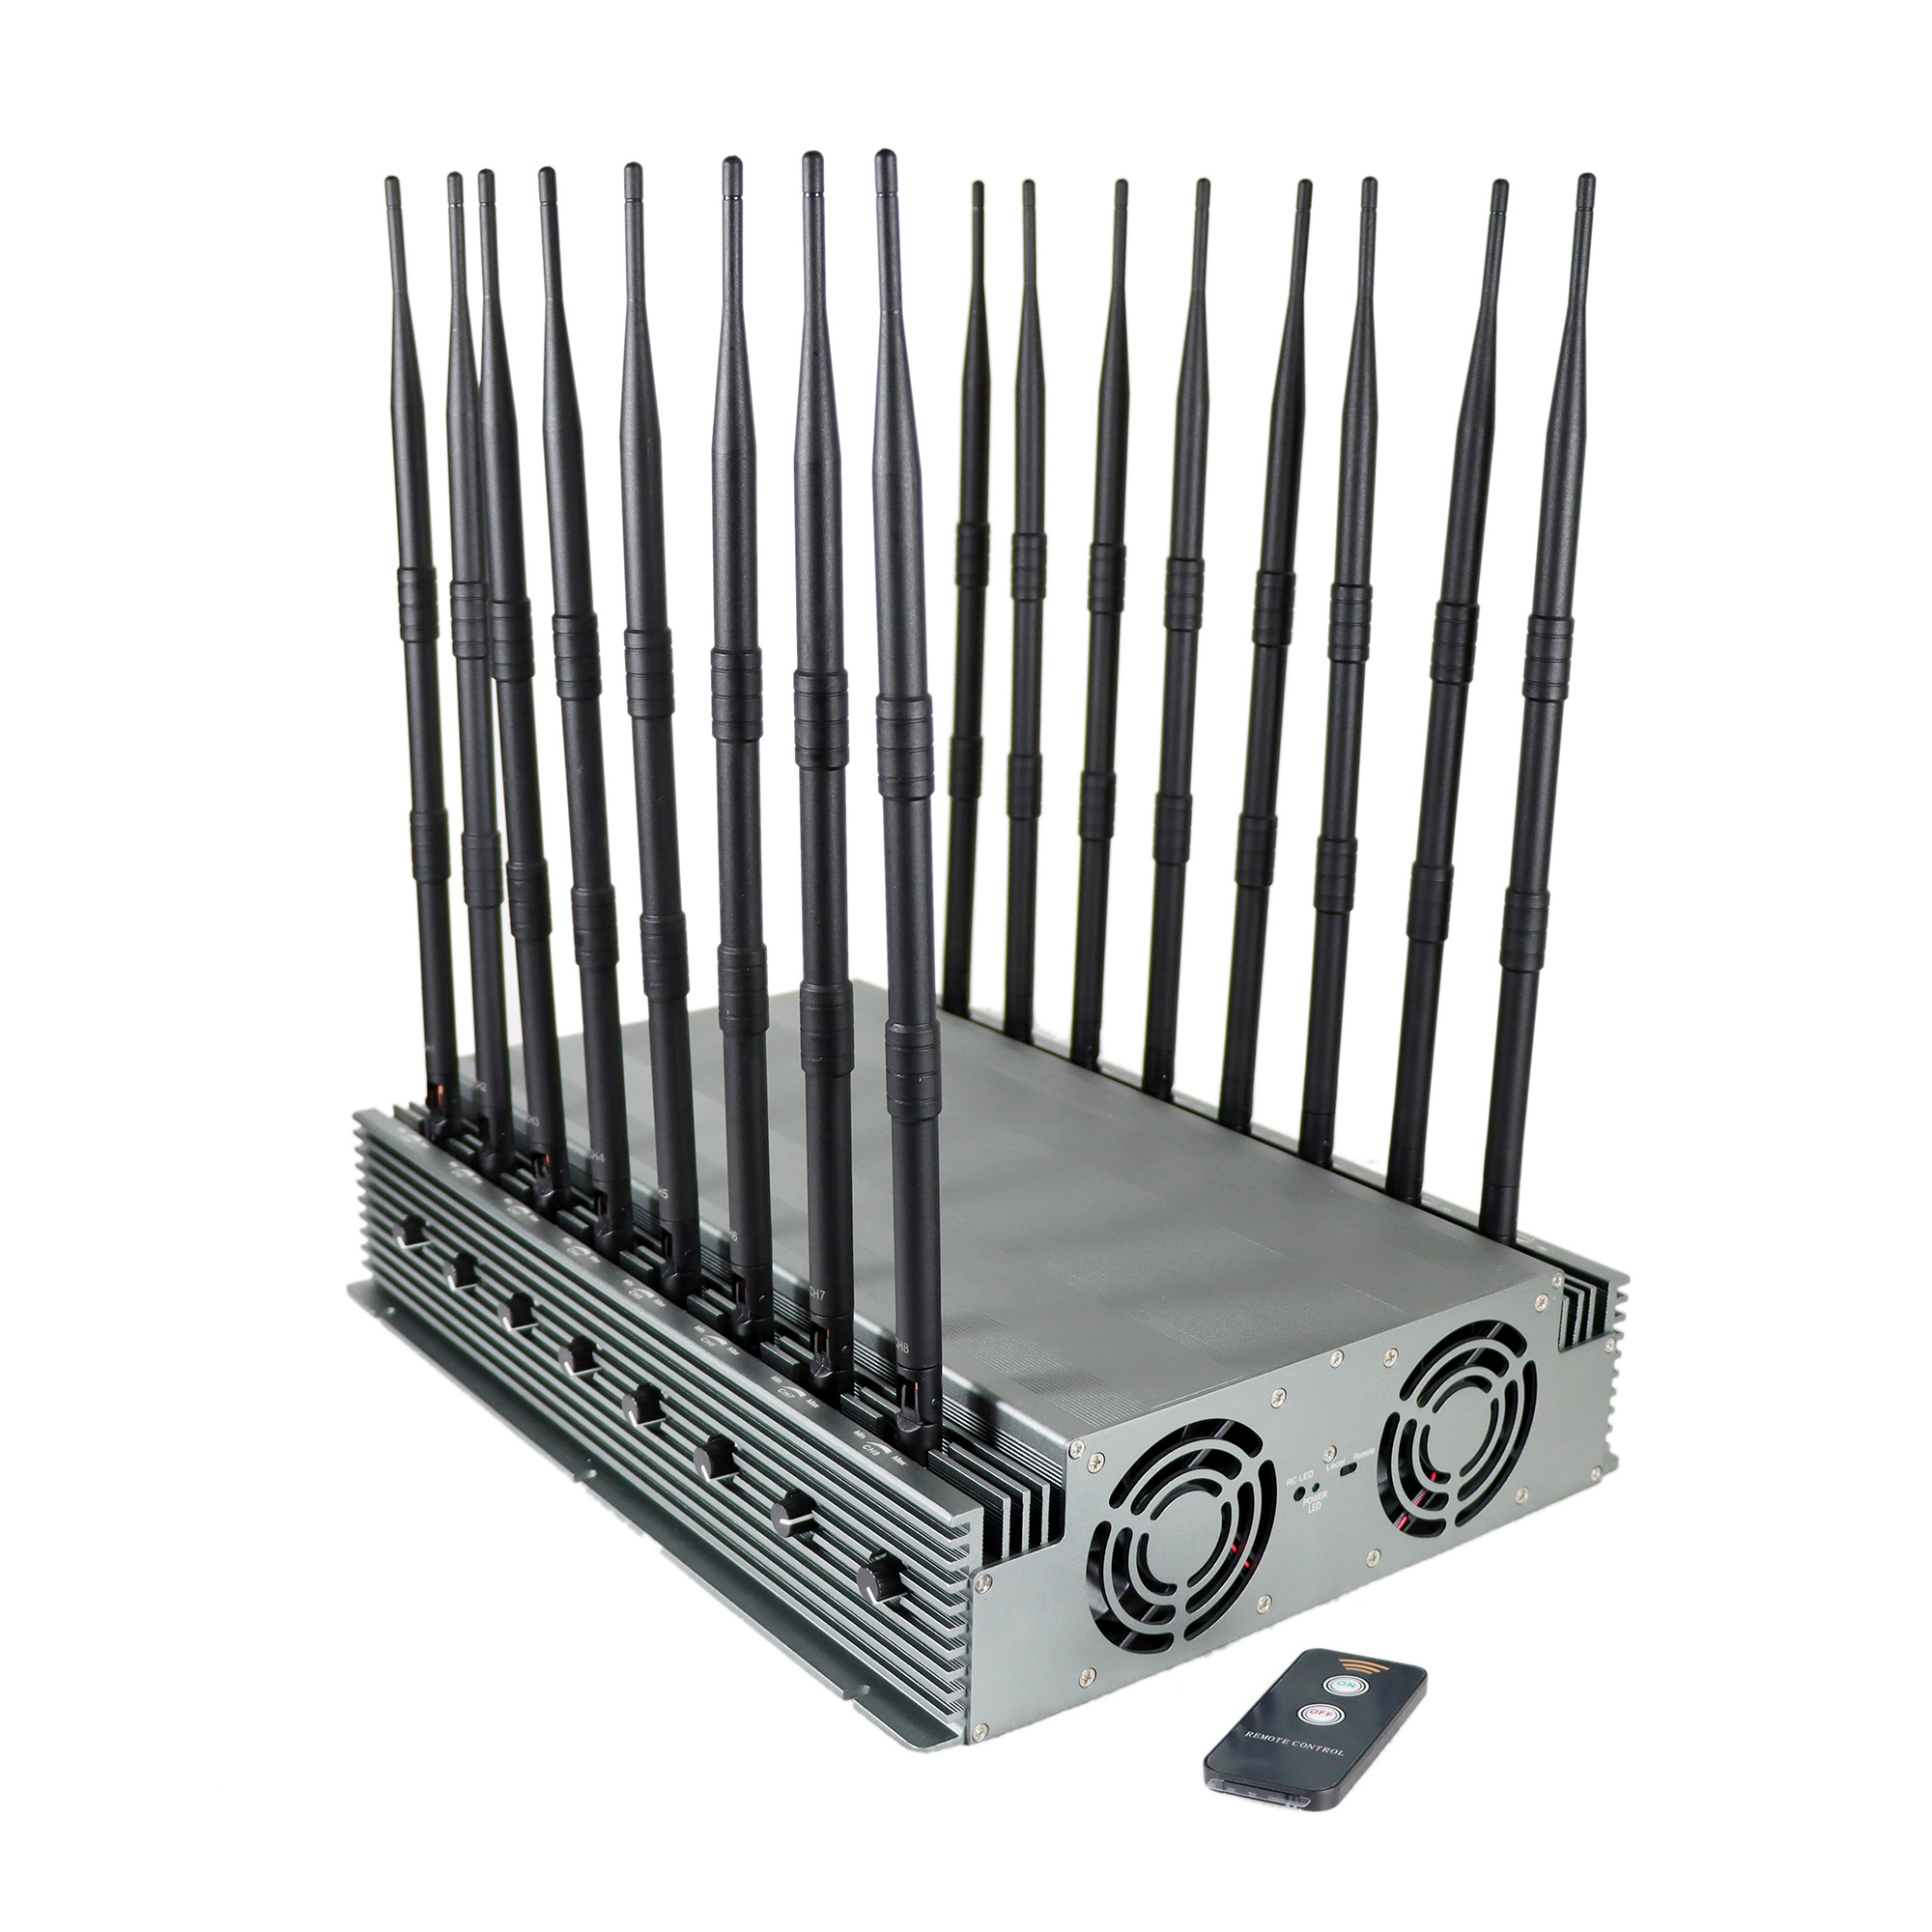 gps wifi signal Jammers